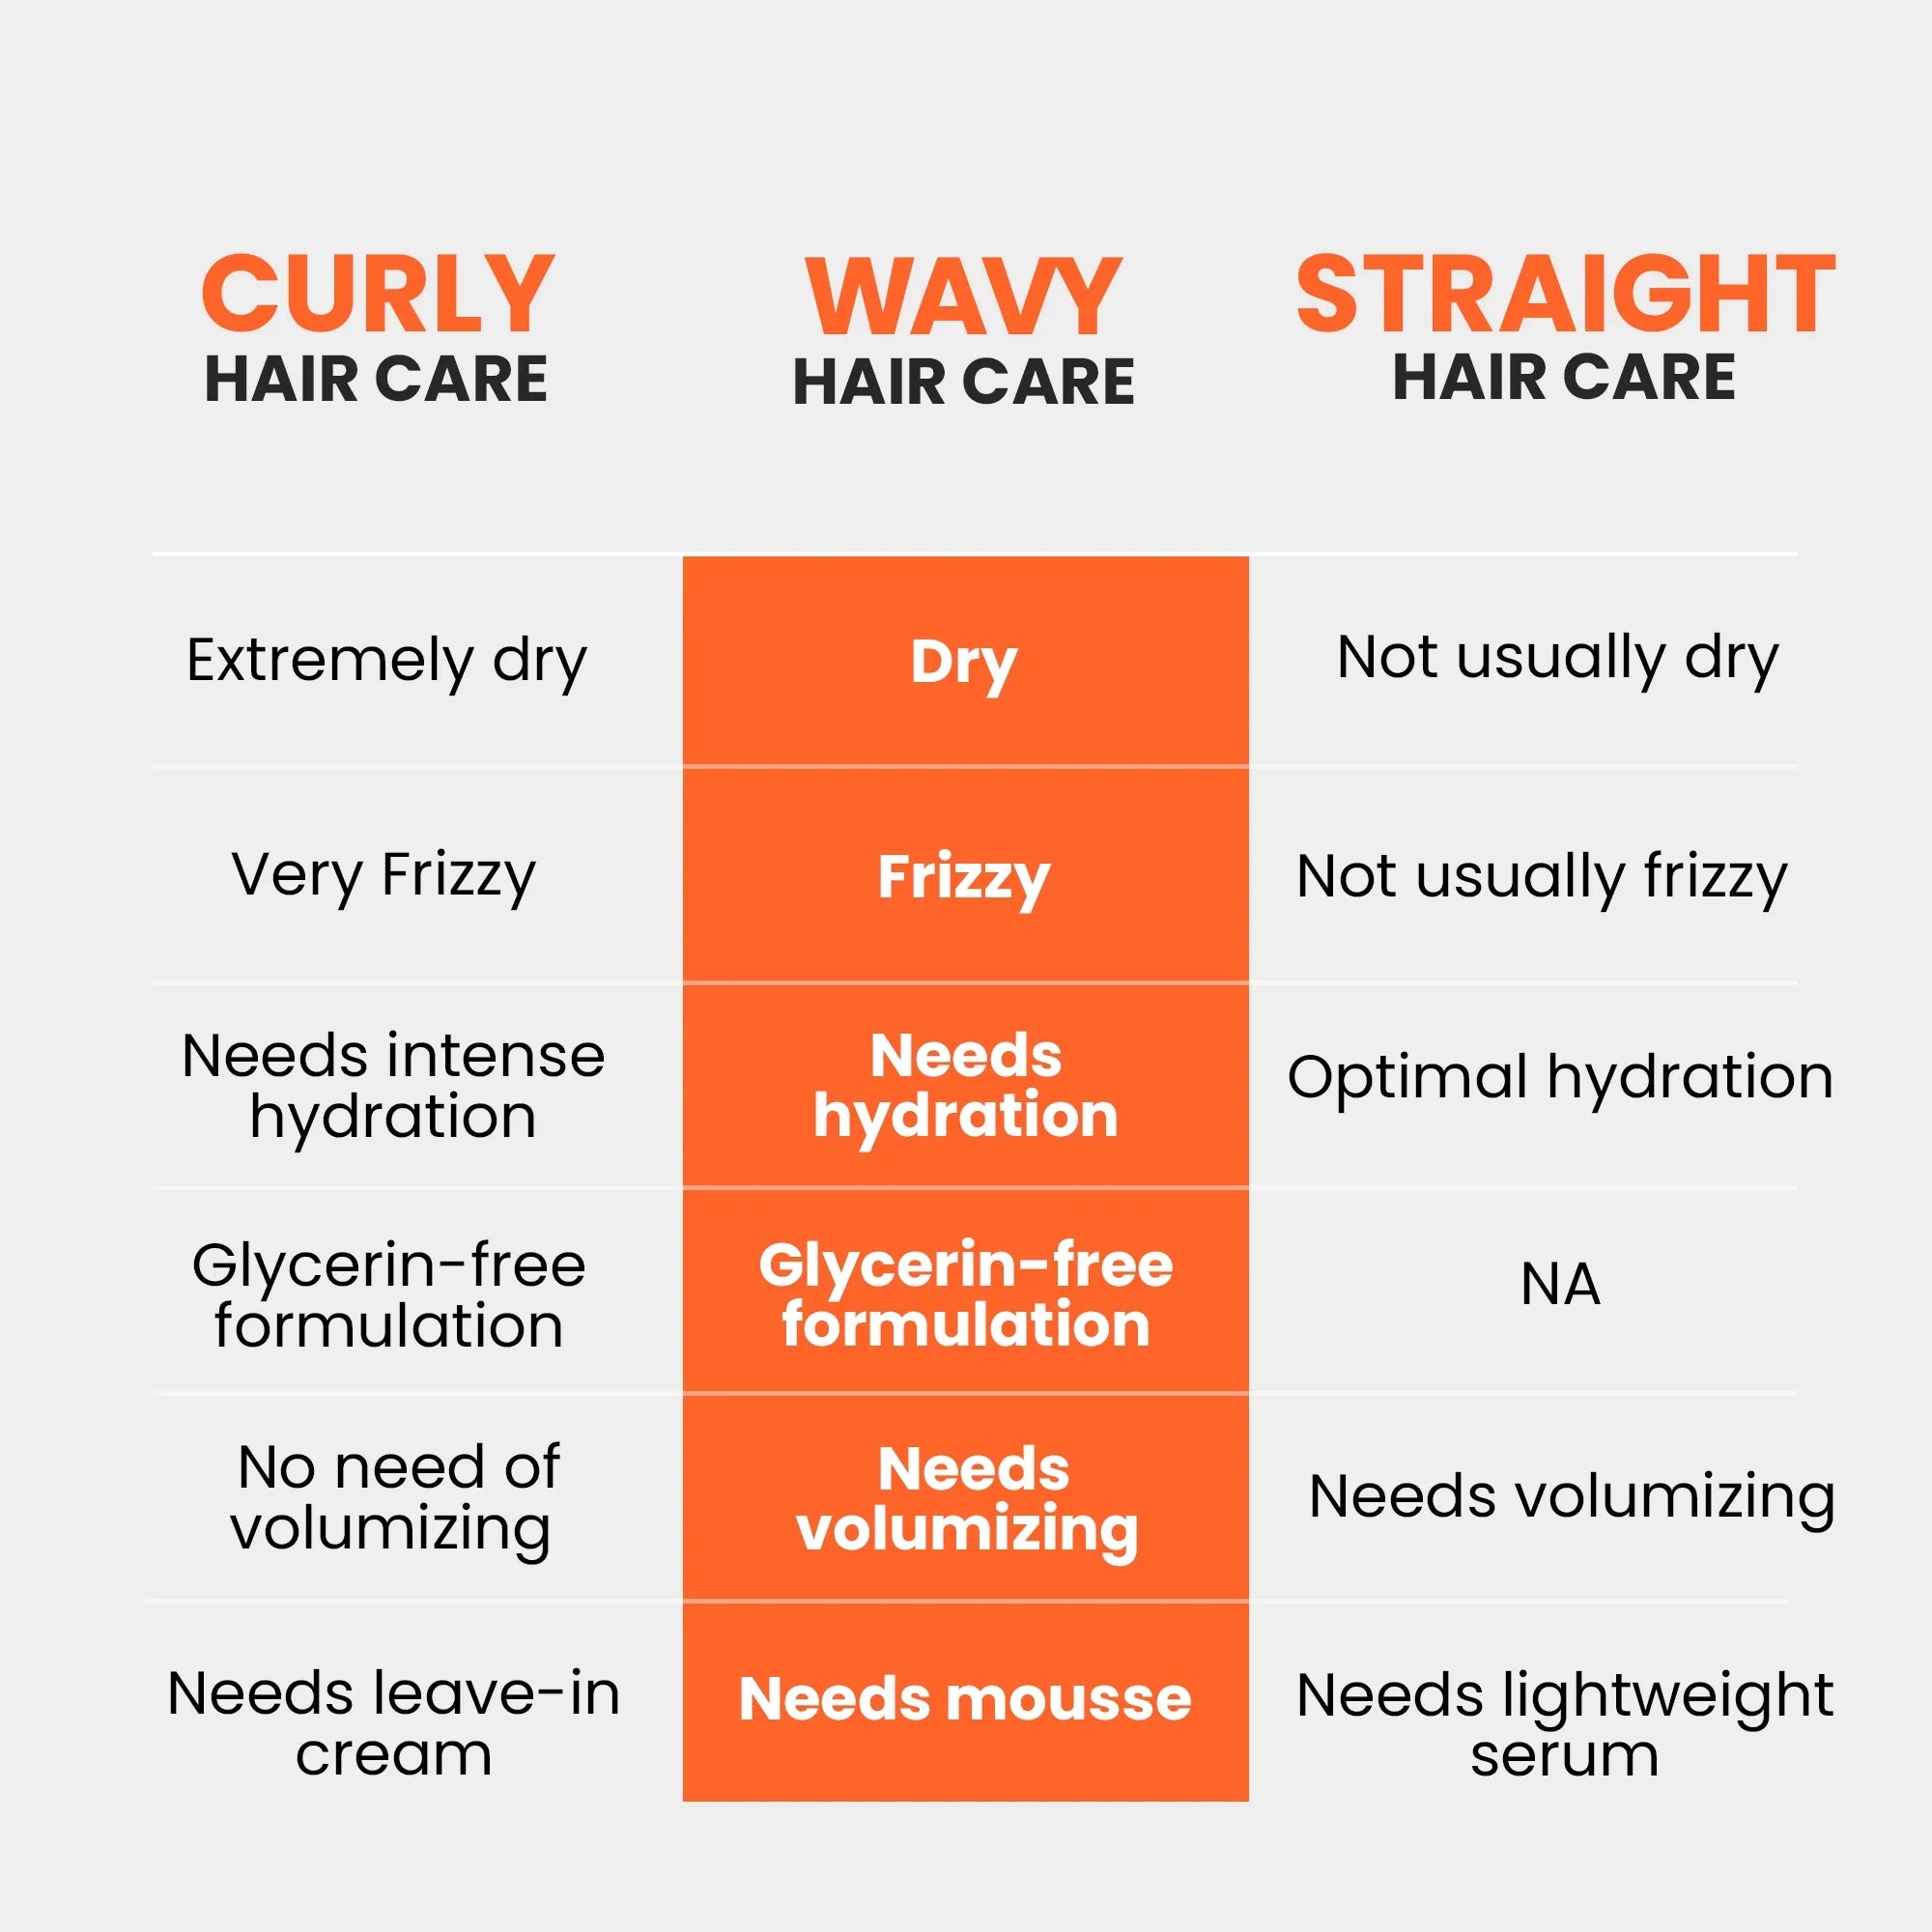 you need different products for wavy hair care beacuse it is different from curly & straight hair care